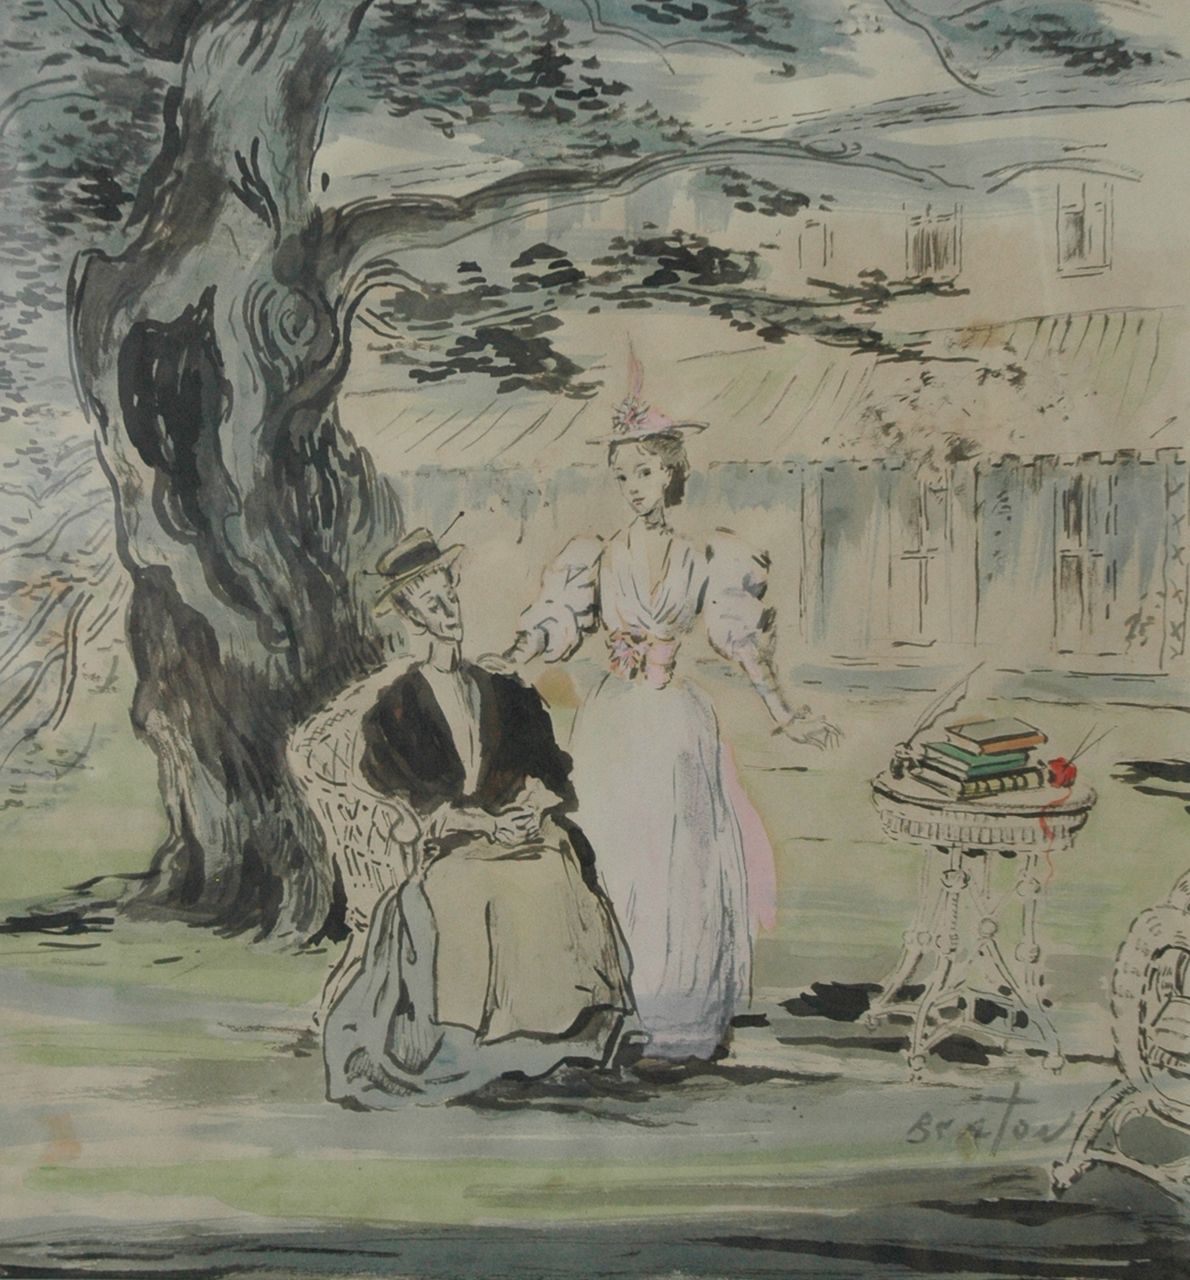 Beaton C.W.H.  | Cecil Walter Hardy Beaton | Watercolours and drawings offered for sale | A scene from the play The Importance of being Earnest: Miss Prism and Cecily, Indian ink and watercolour on paper 46.5 x 49.5 cm, signed l.r.